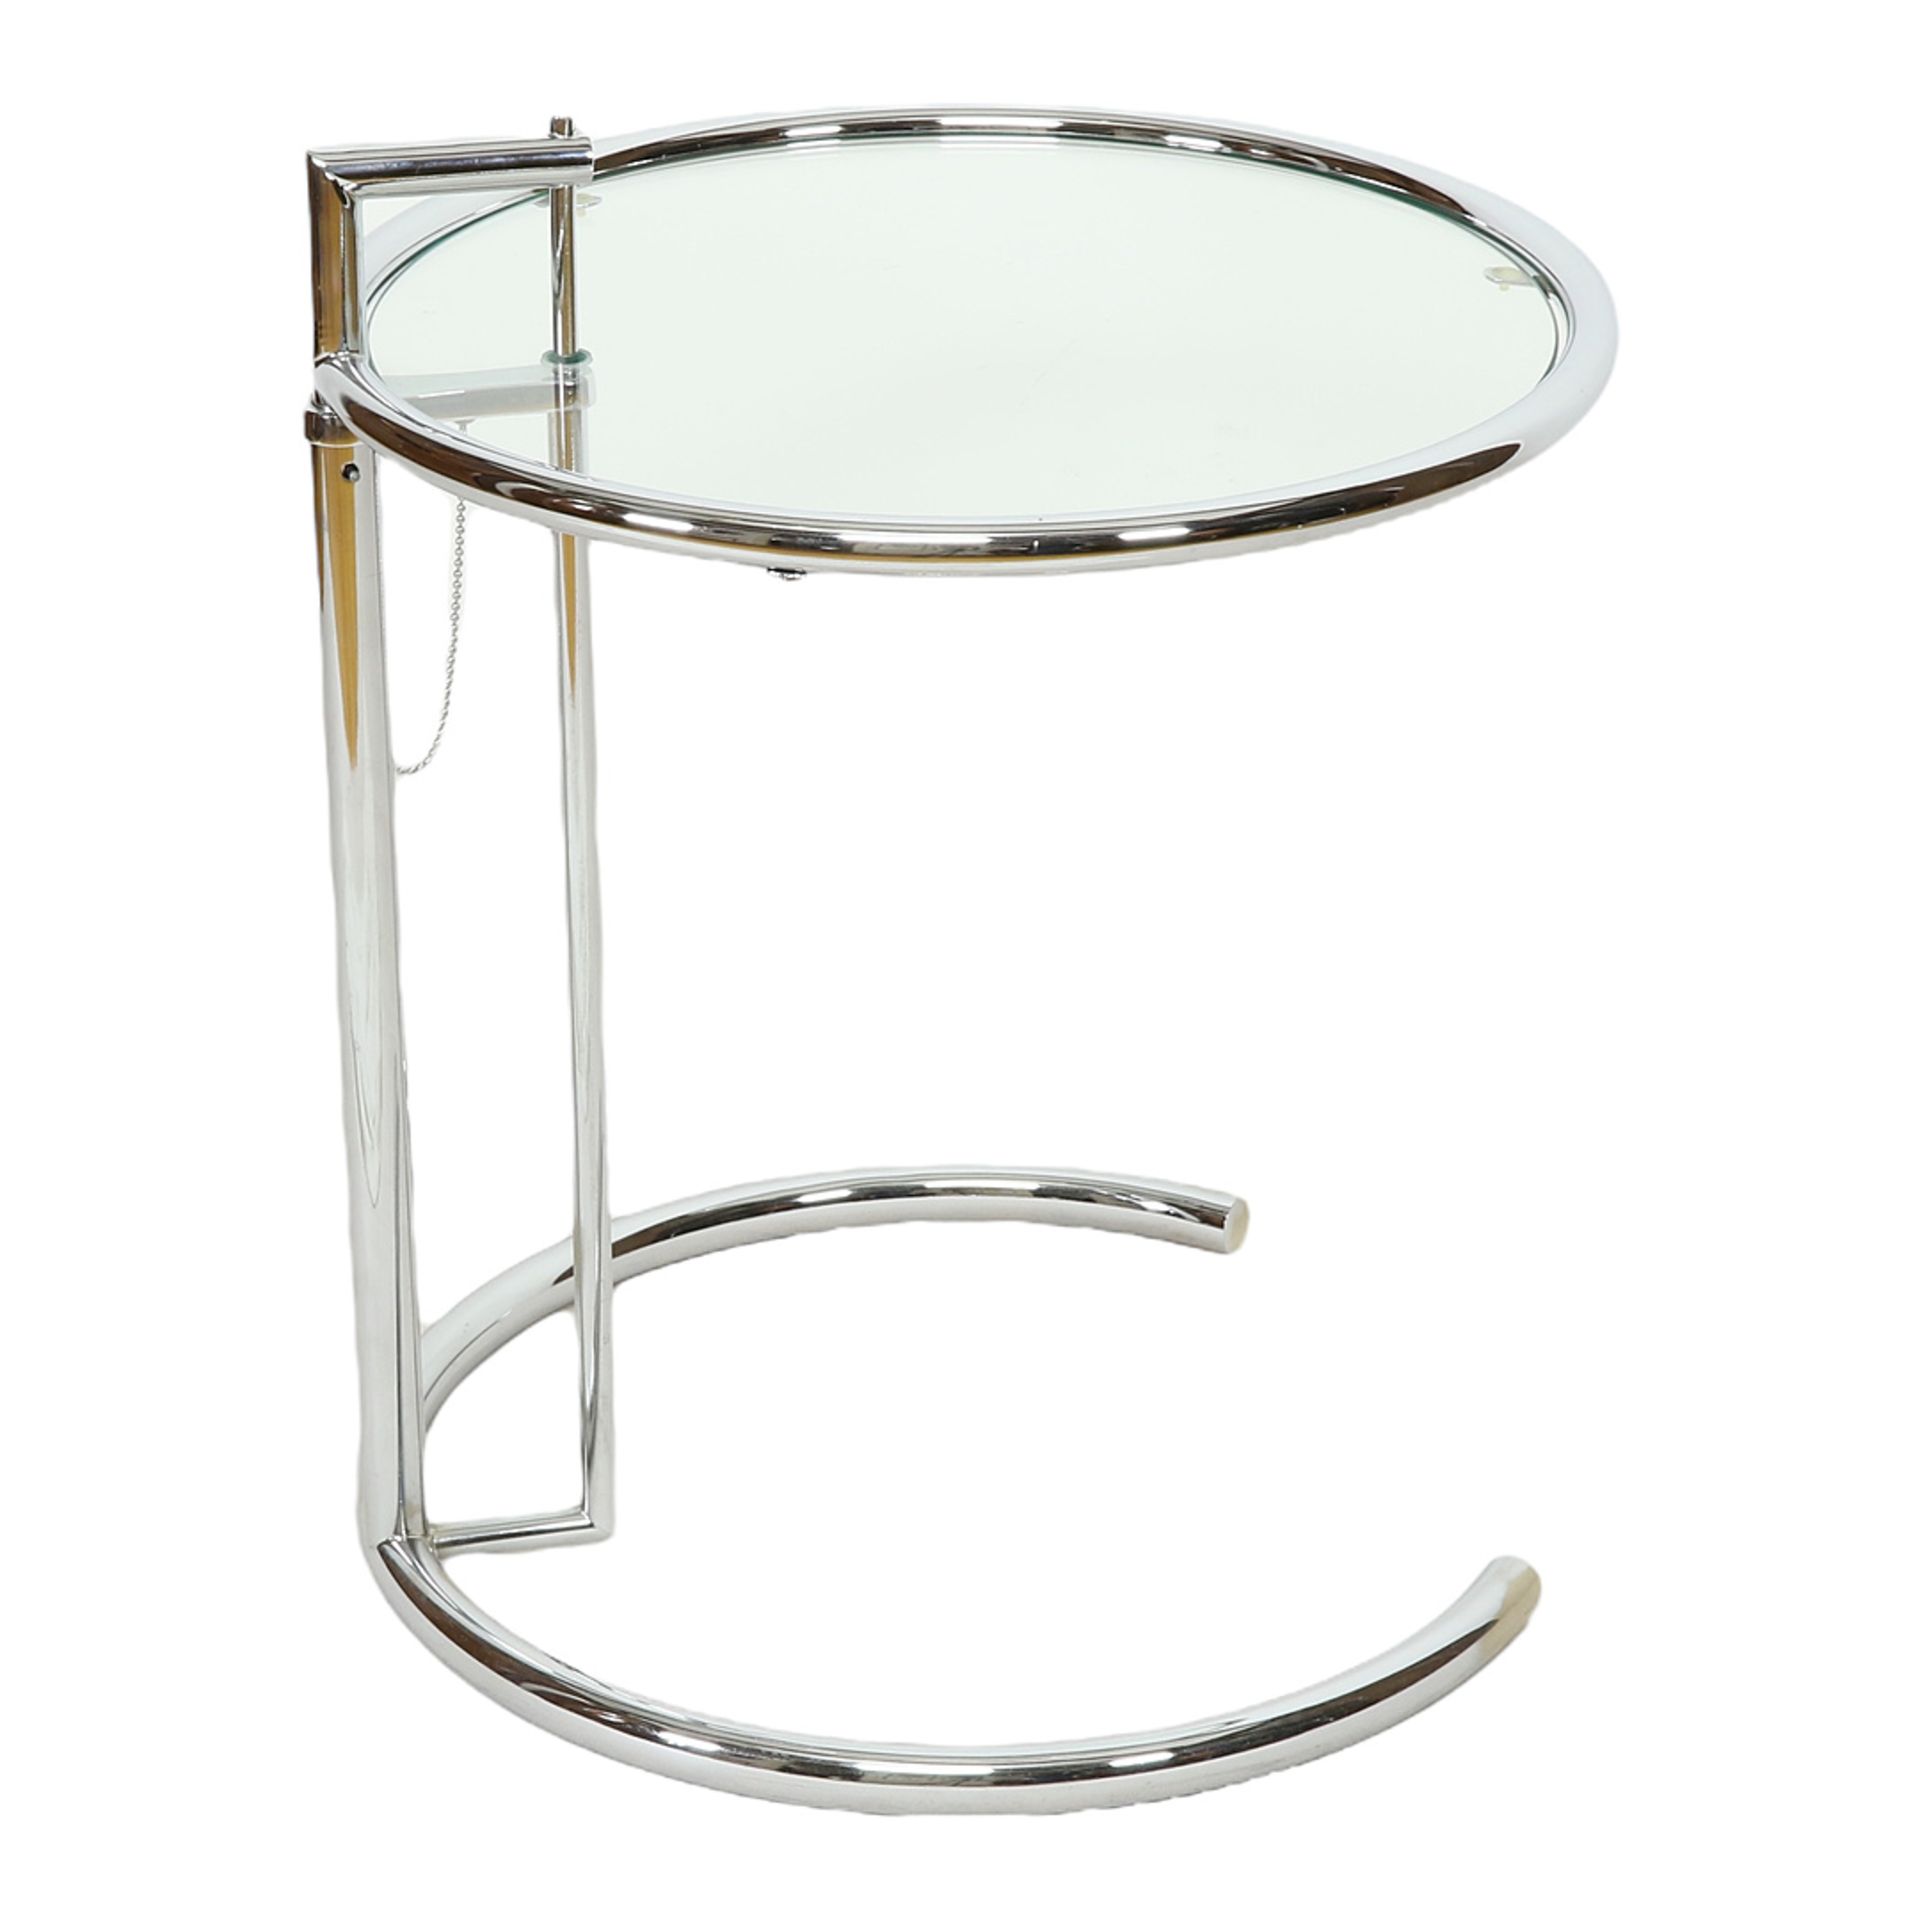 Eileen Gray Modern side table E.1027 "Adjustable Table" - Image 2 of 4